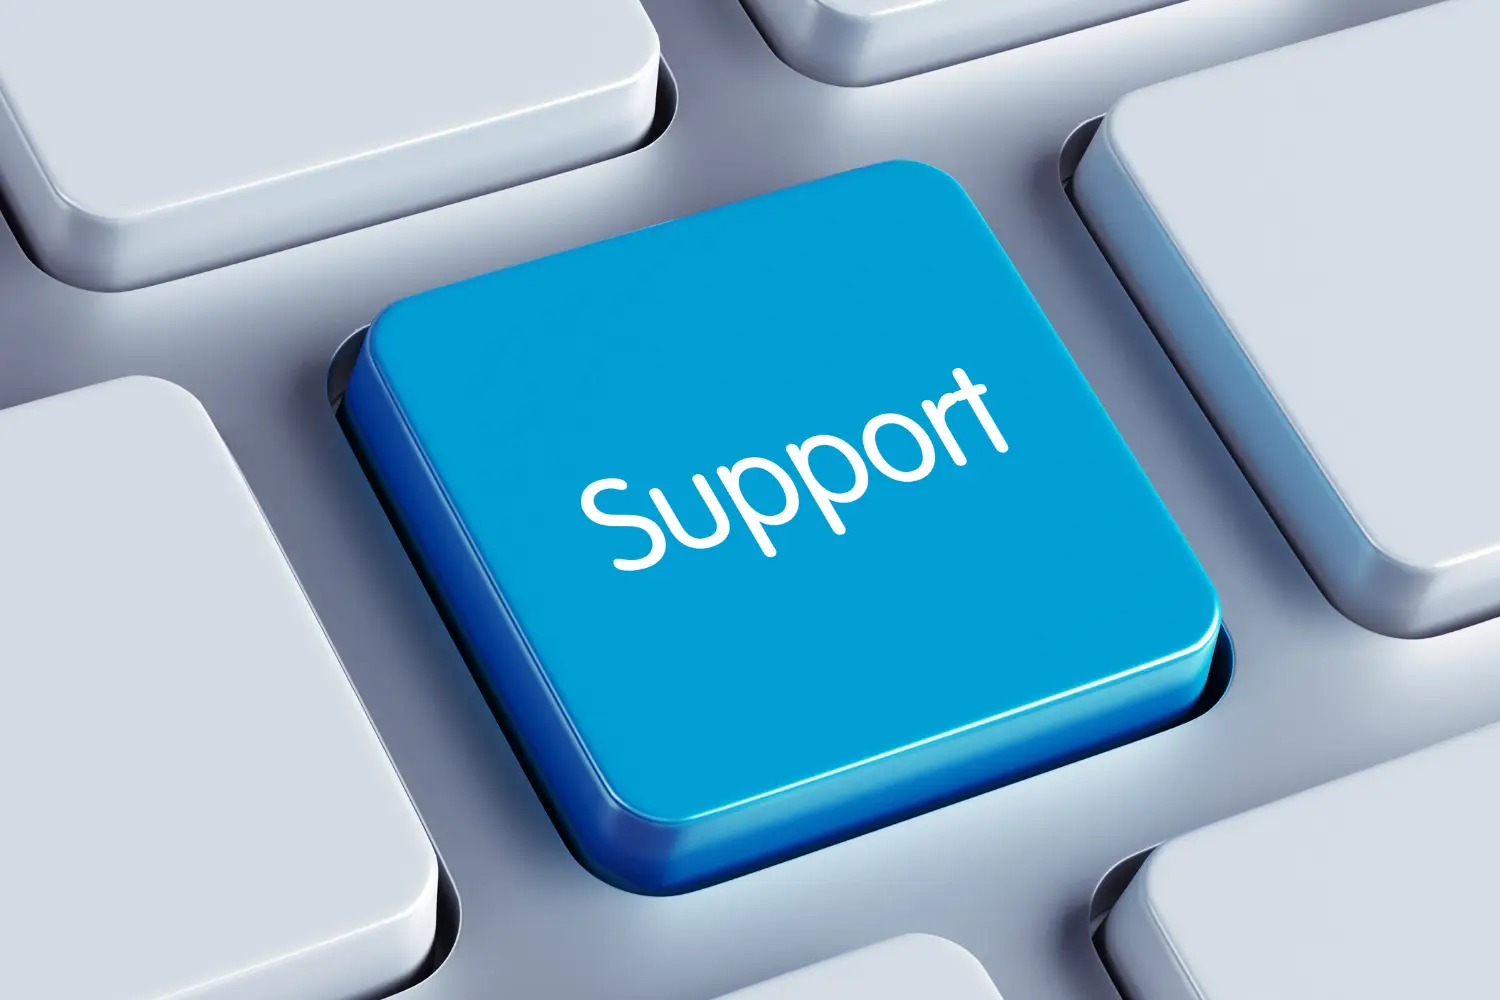 Why Ravensdale Digital for IT Support?